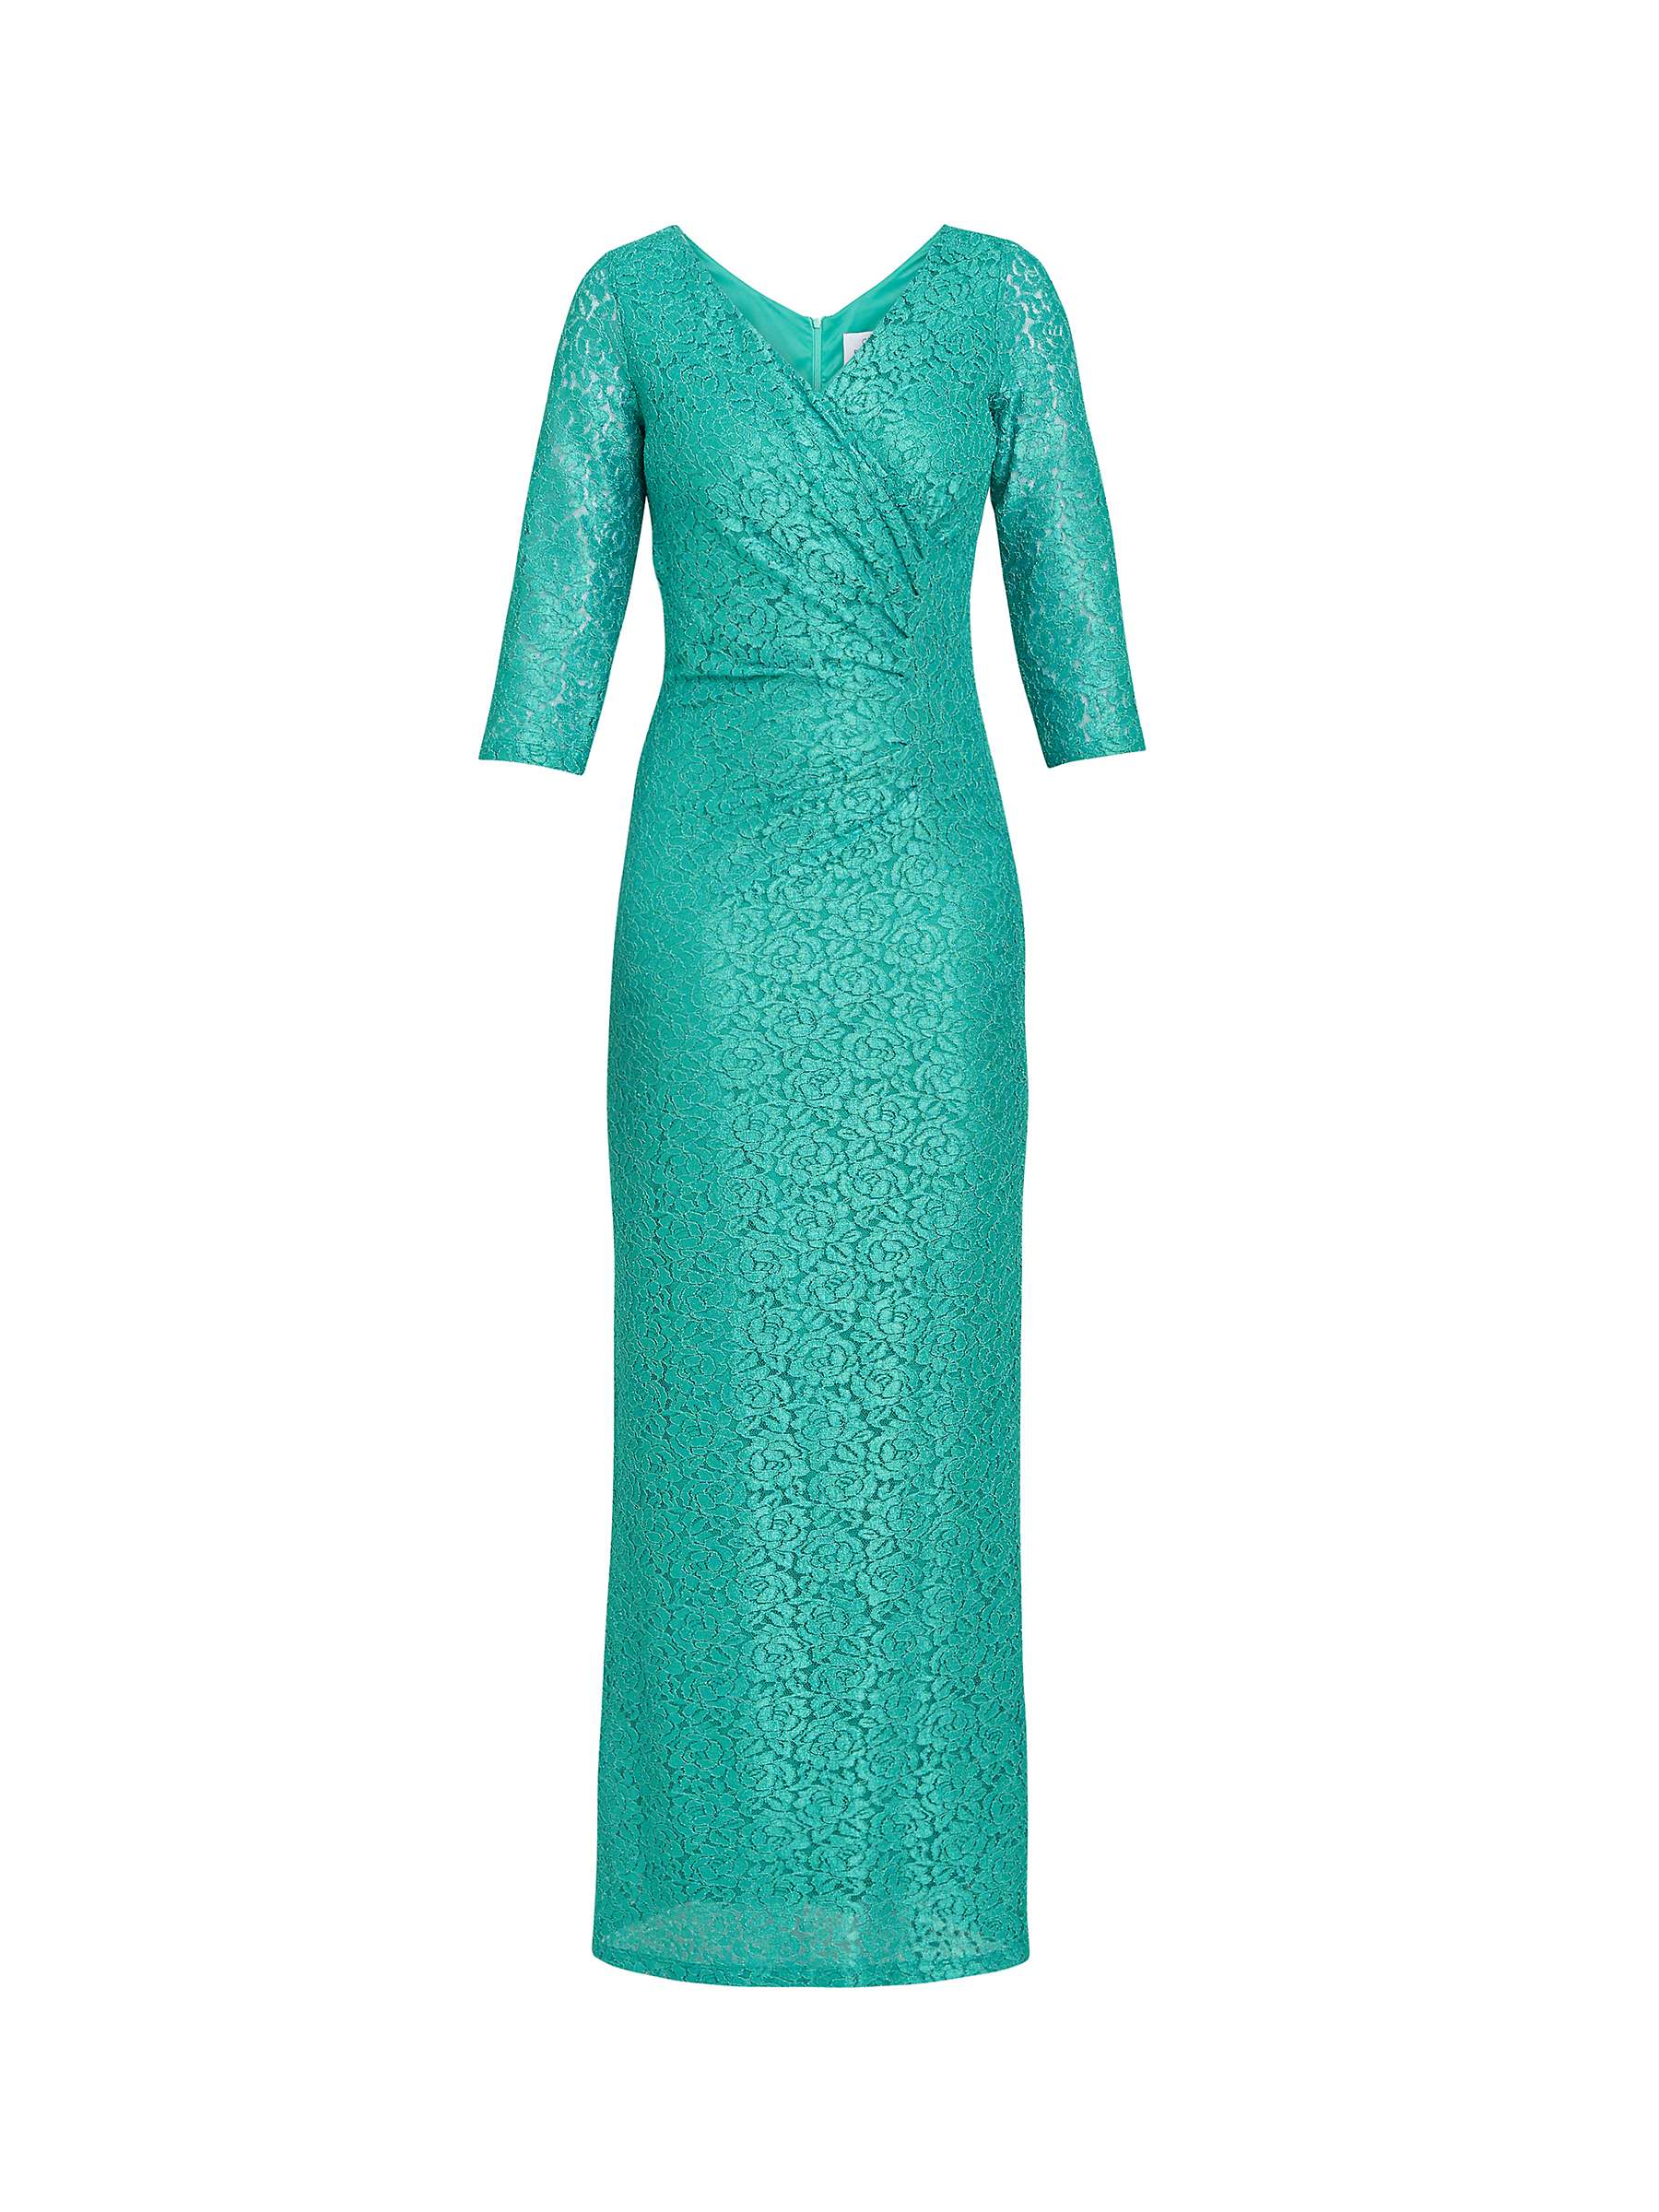 Buy Gina Bacconi Fearne Lace Wrap Maxi Dress, Jade Online at johnlewis.com